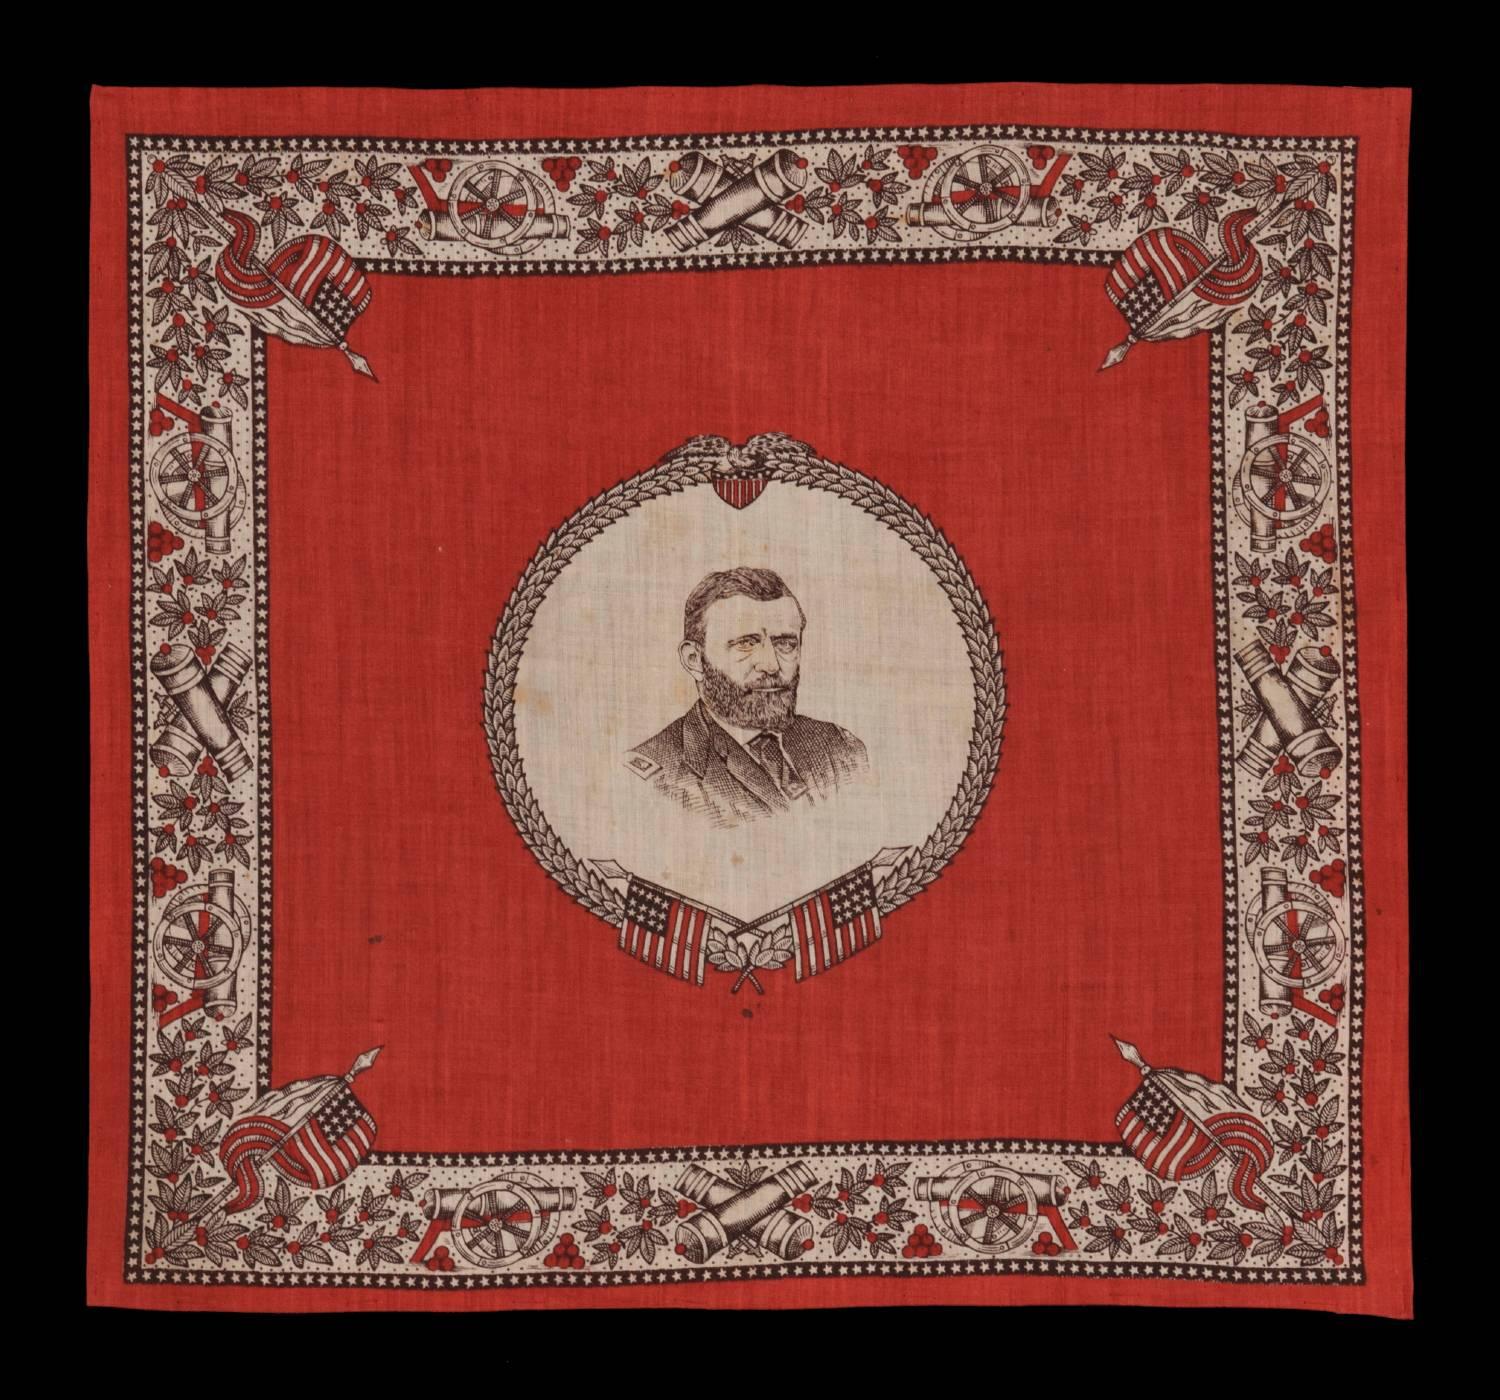 Printed cotton kerchief with a portrait of Ulysses S. Grant in military dress, one of only two known examples, 1868 or 1872:

Printed cotton kerchief, made for one of the two presidential campaigns of Ulysses S. Grant. Framed in a wreath of olive